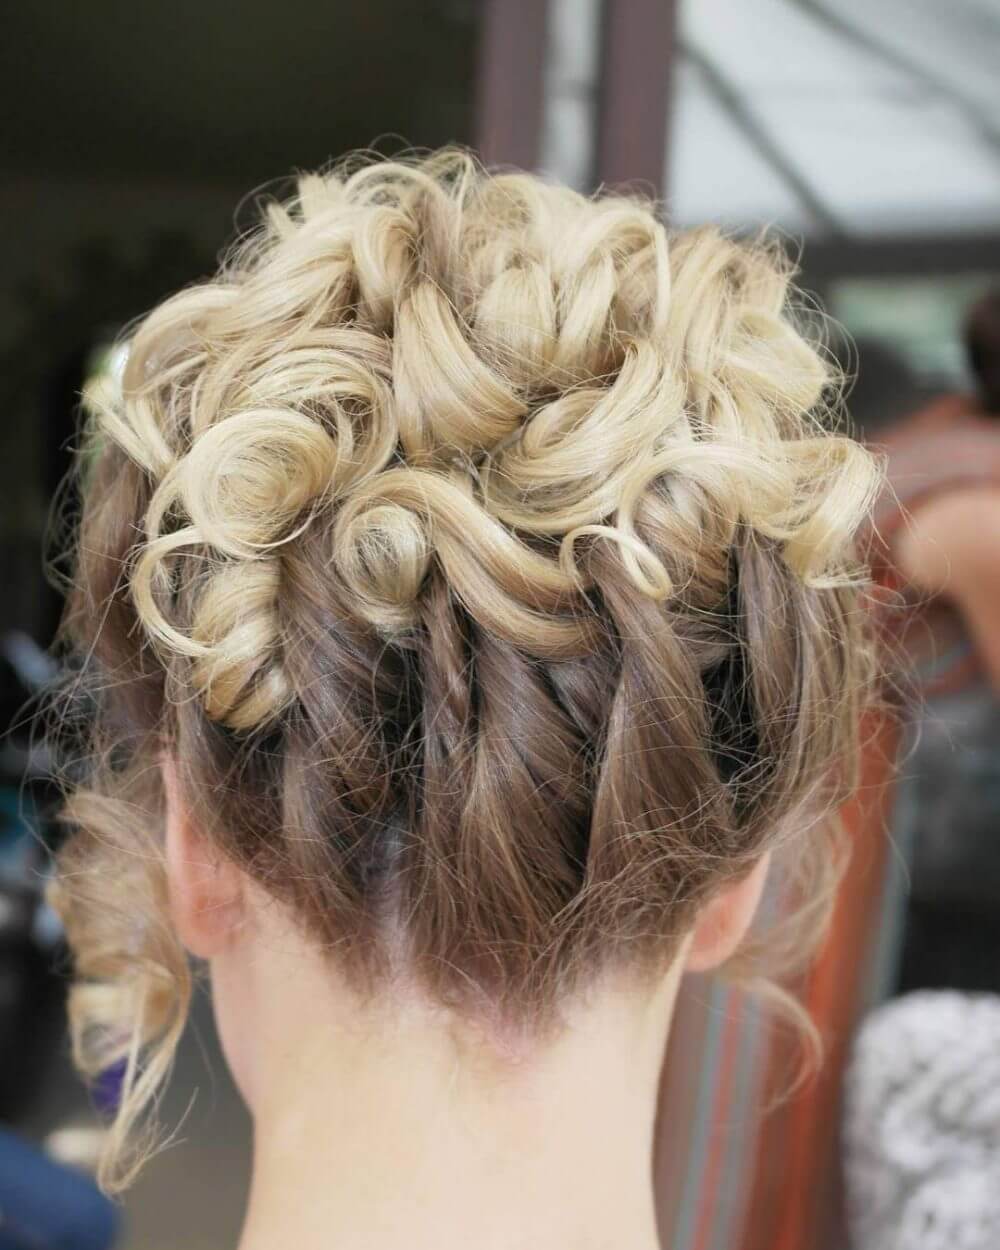 Curly Hairstyles for Prom